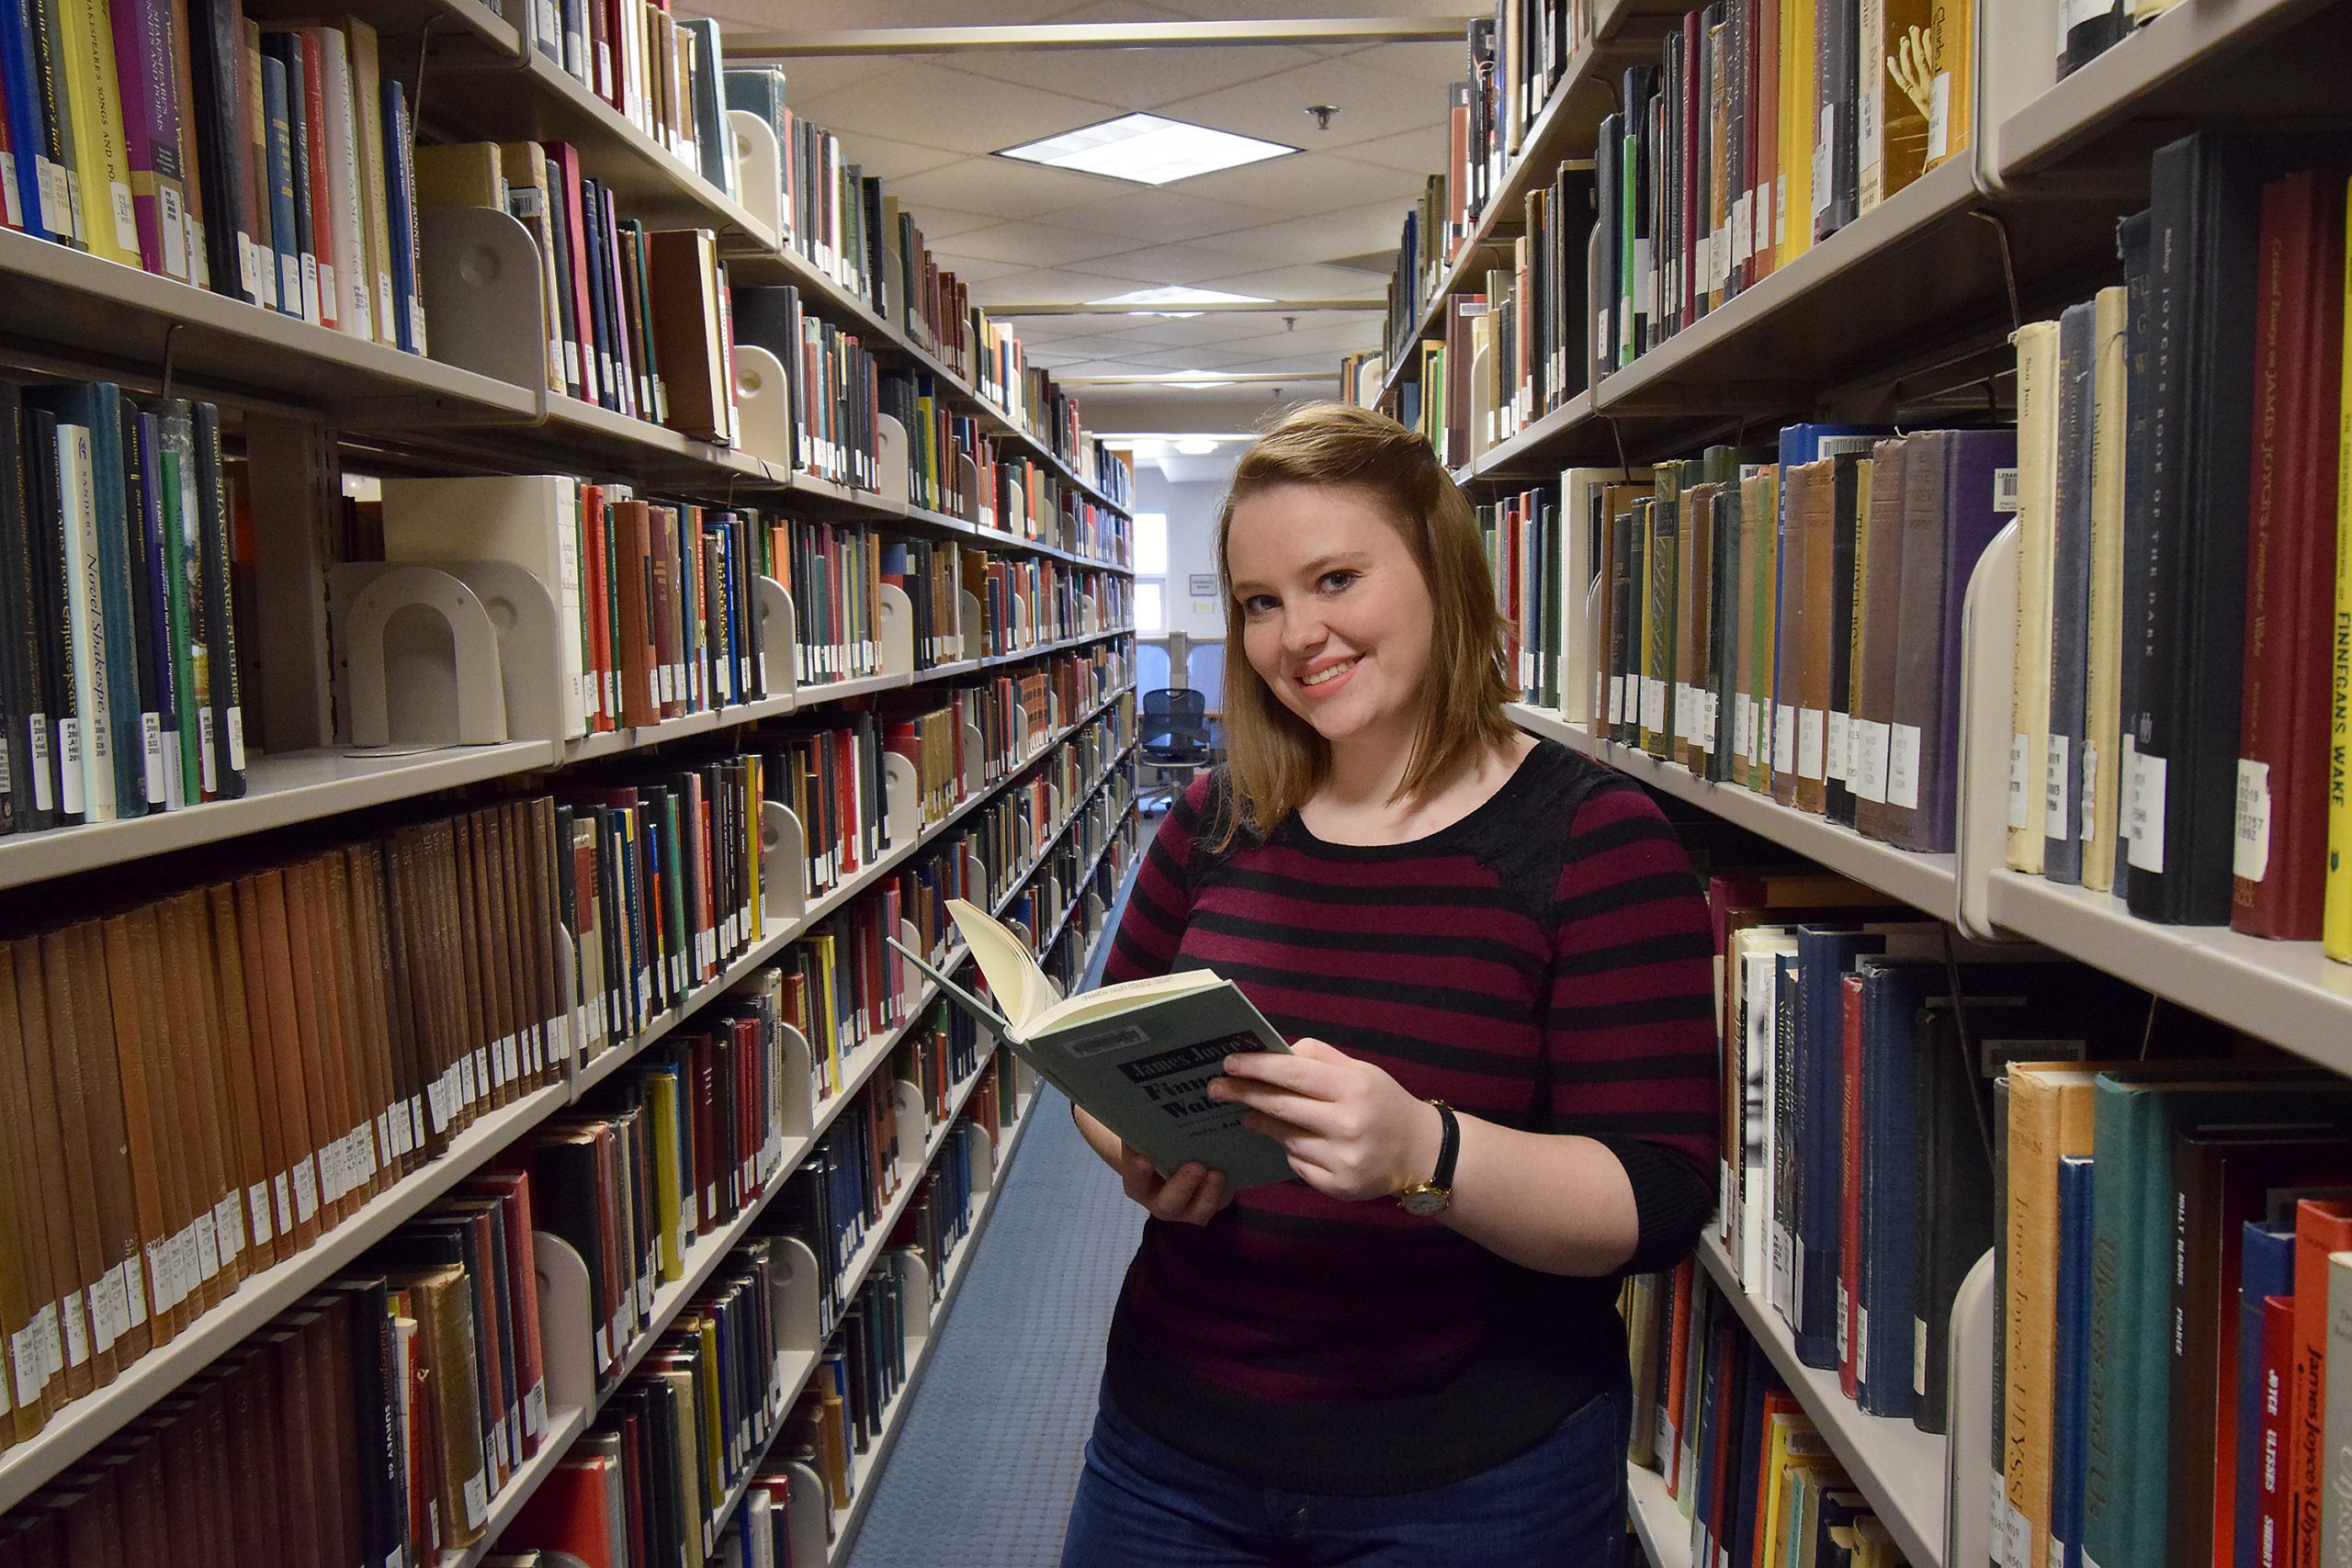 Student stands in row of books in library